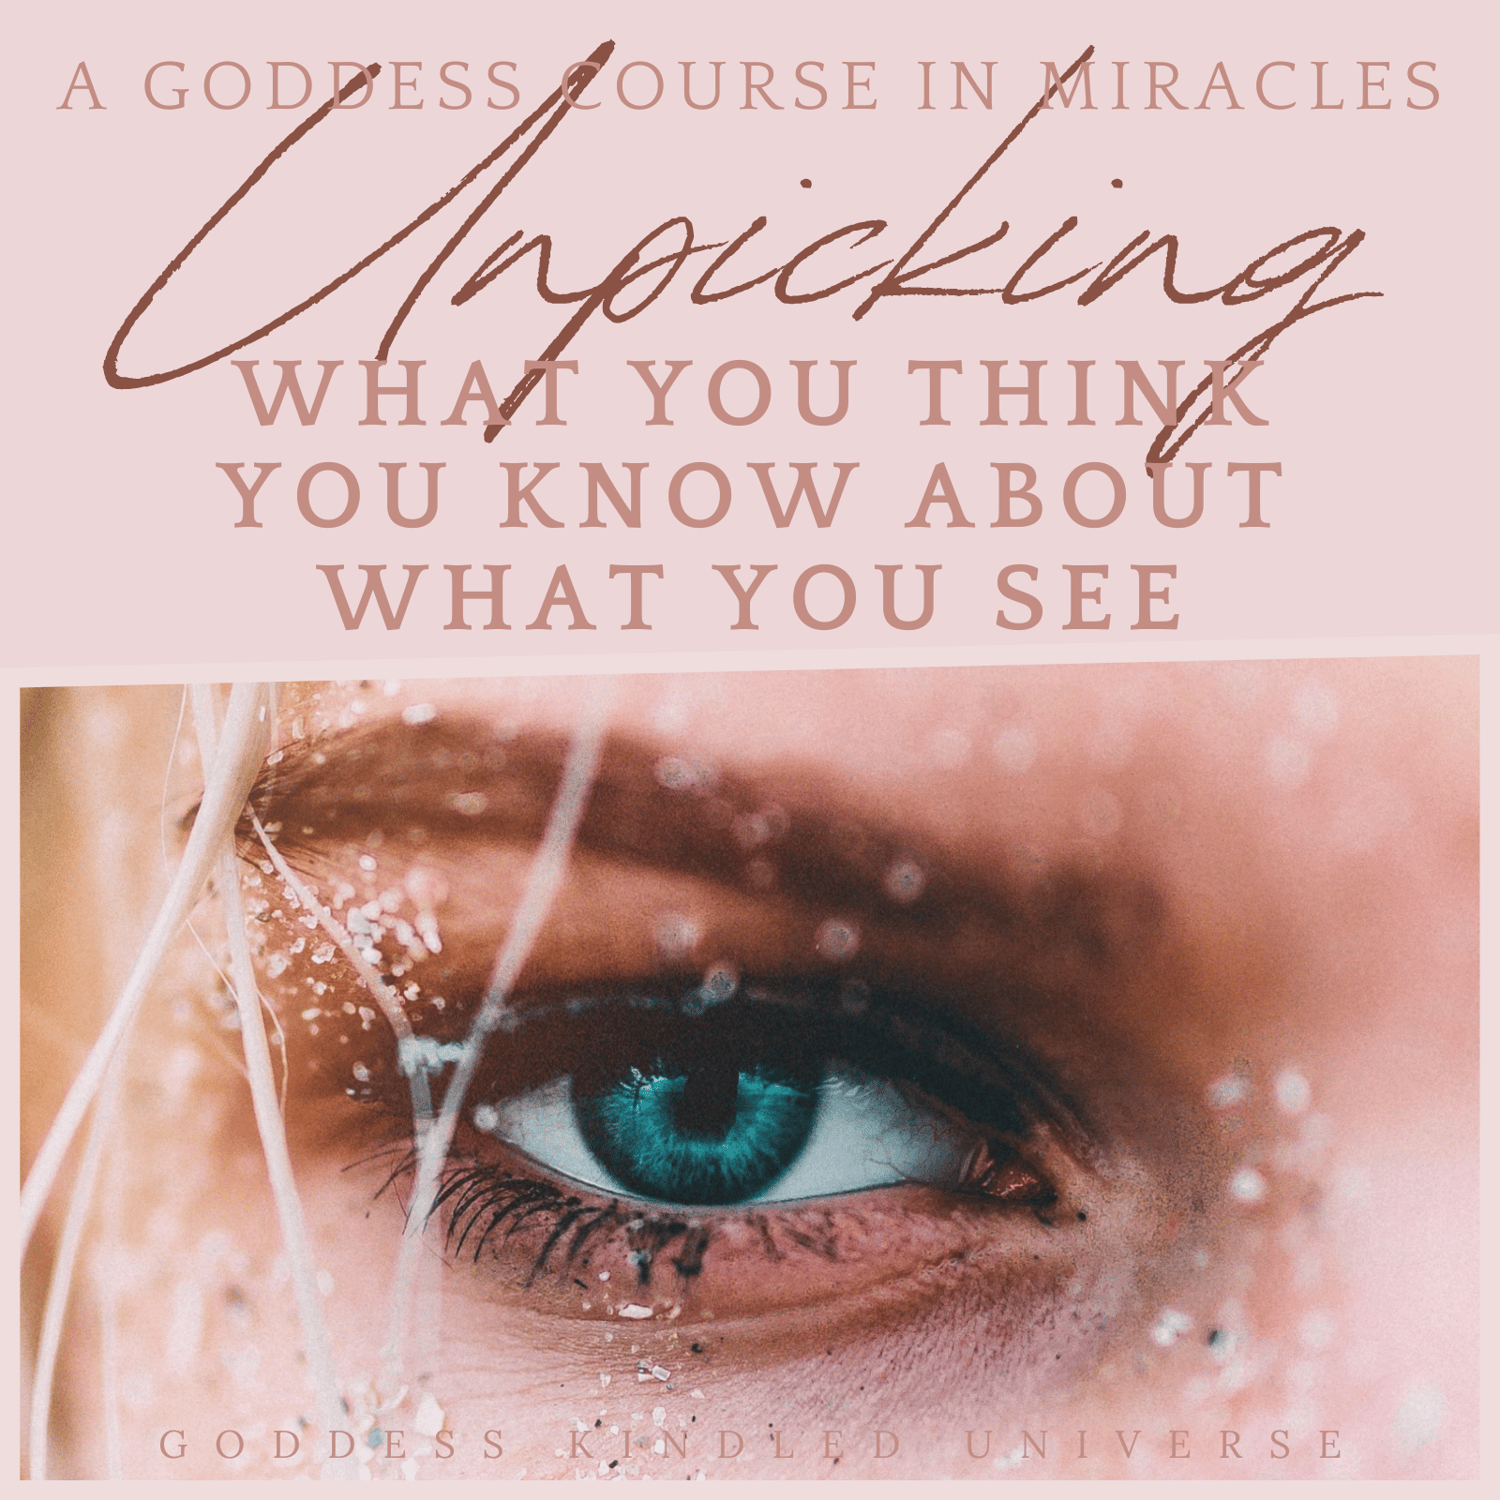 A Goddess Course In Miracles AGCIM by Sondra Turnbull at Goddess Kindled Universe, unpicking what you think you know about what you see